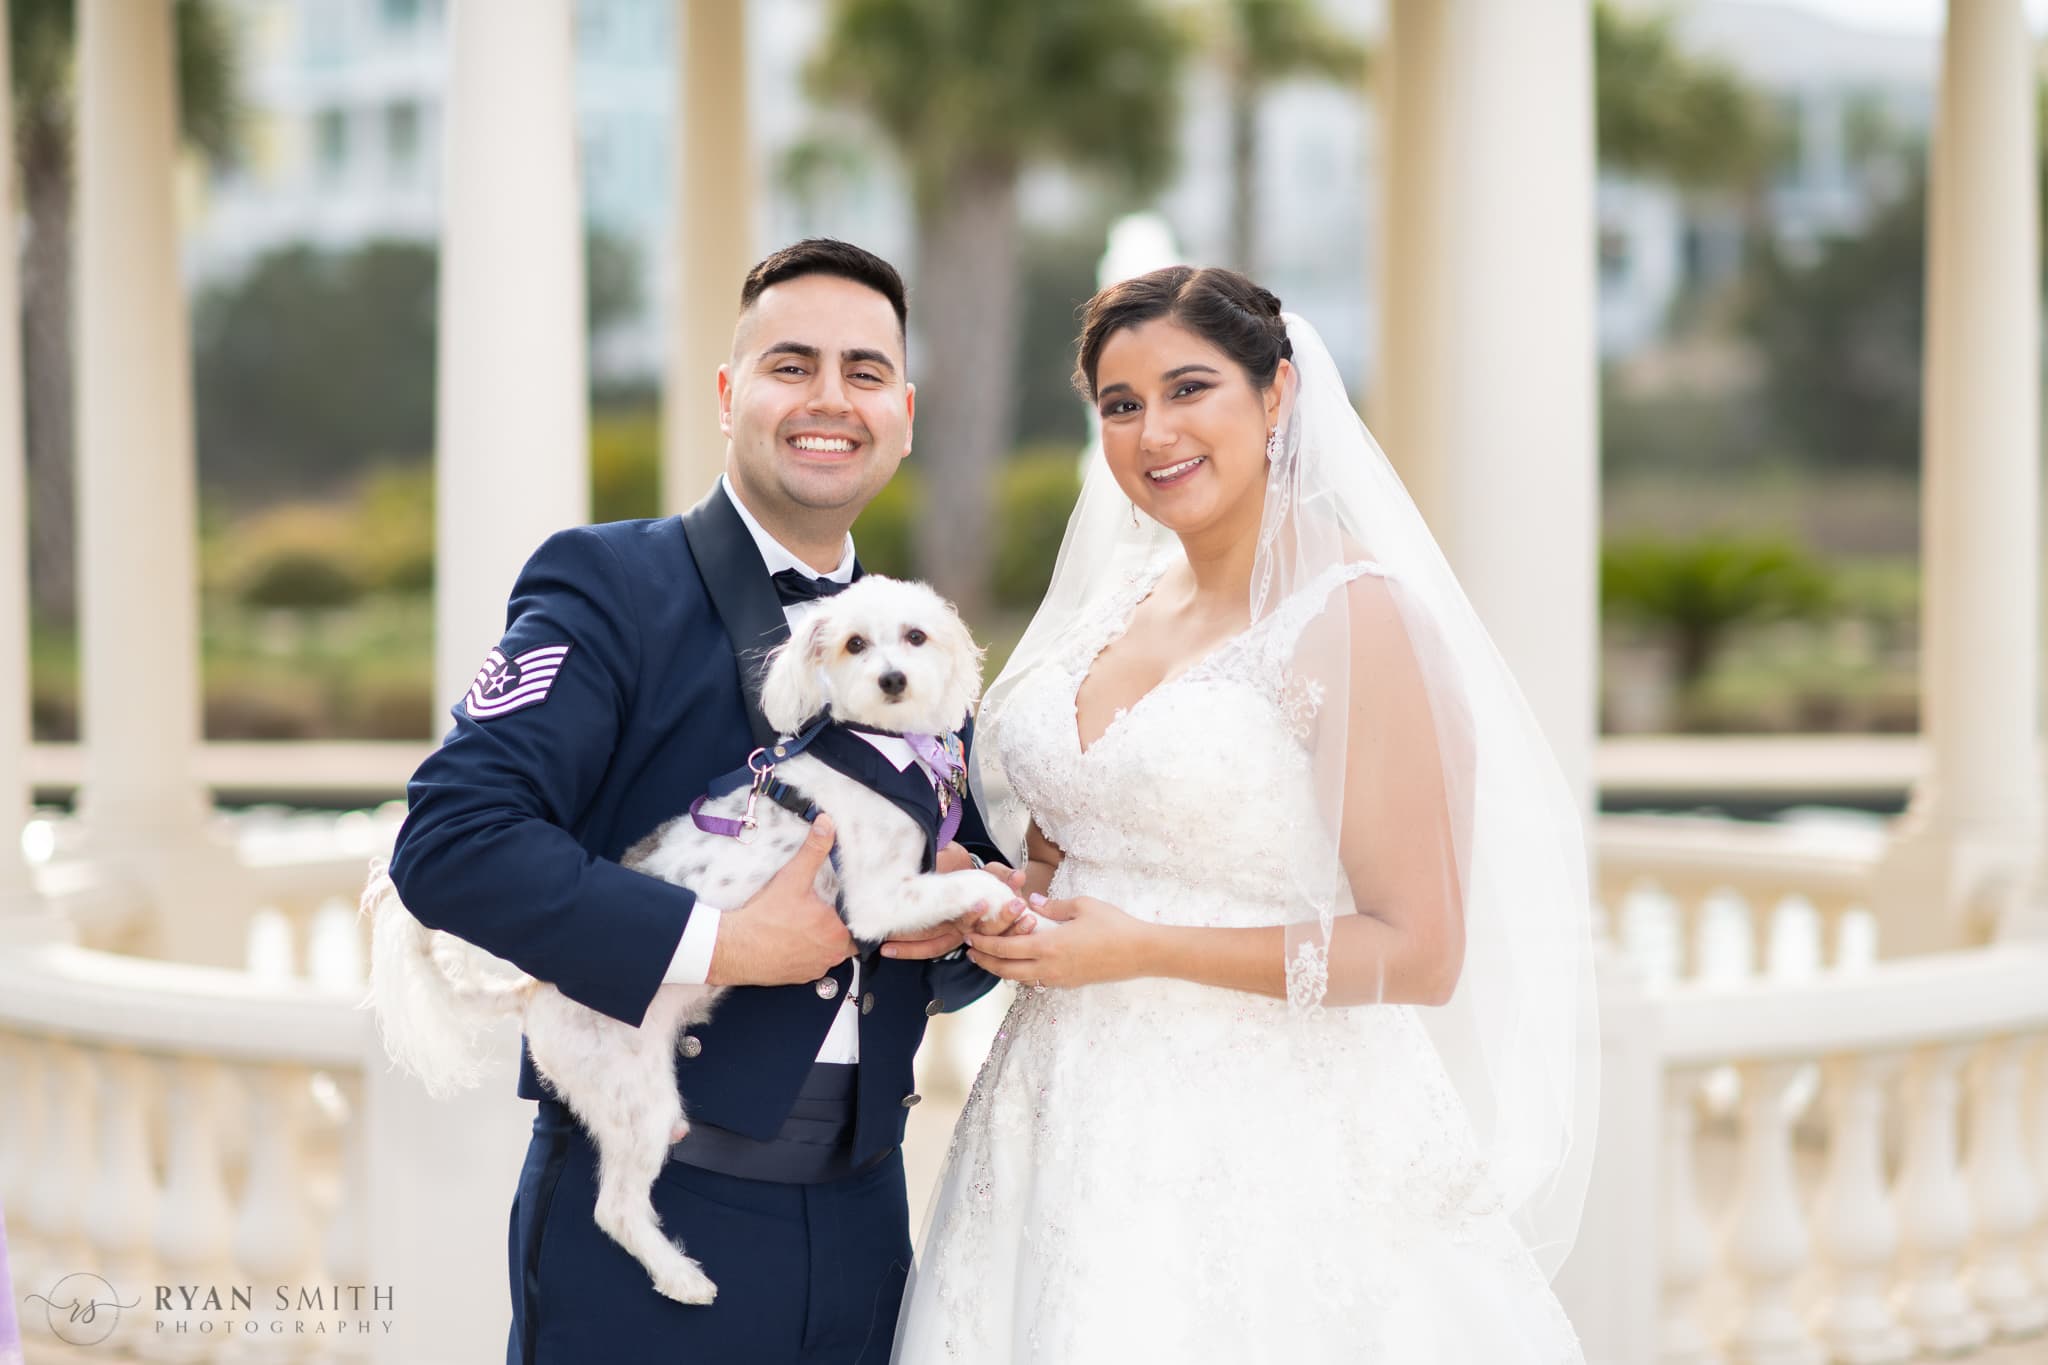 Bride and groom with their three leg doggie ring bearer  - 21 Main Events at North Beach